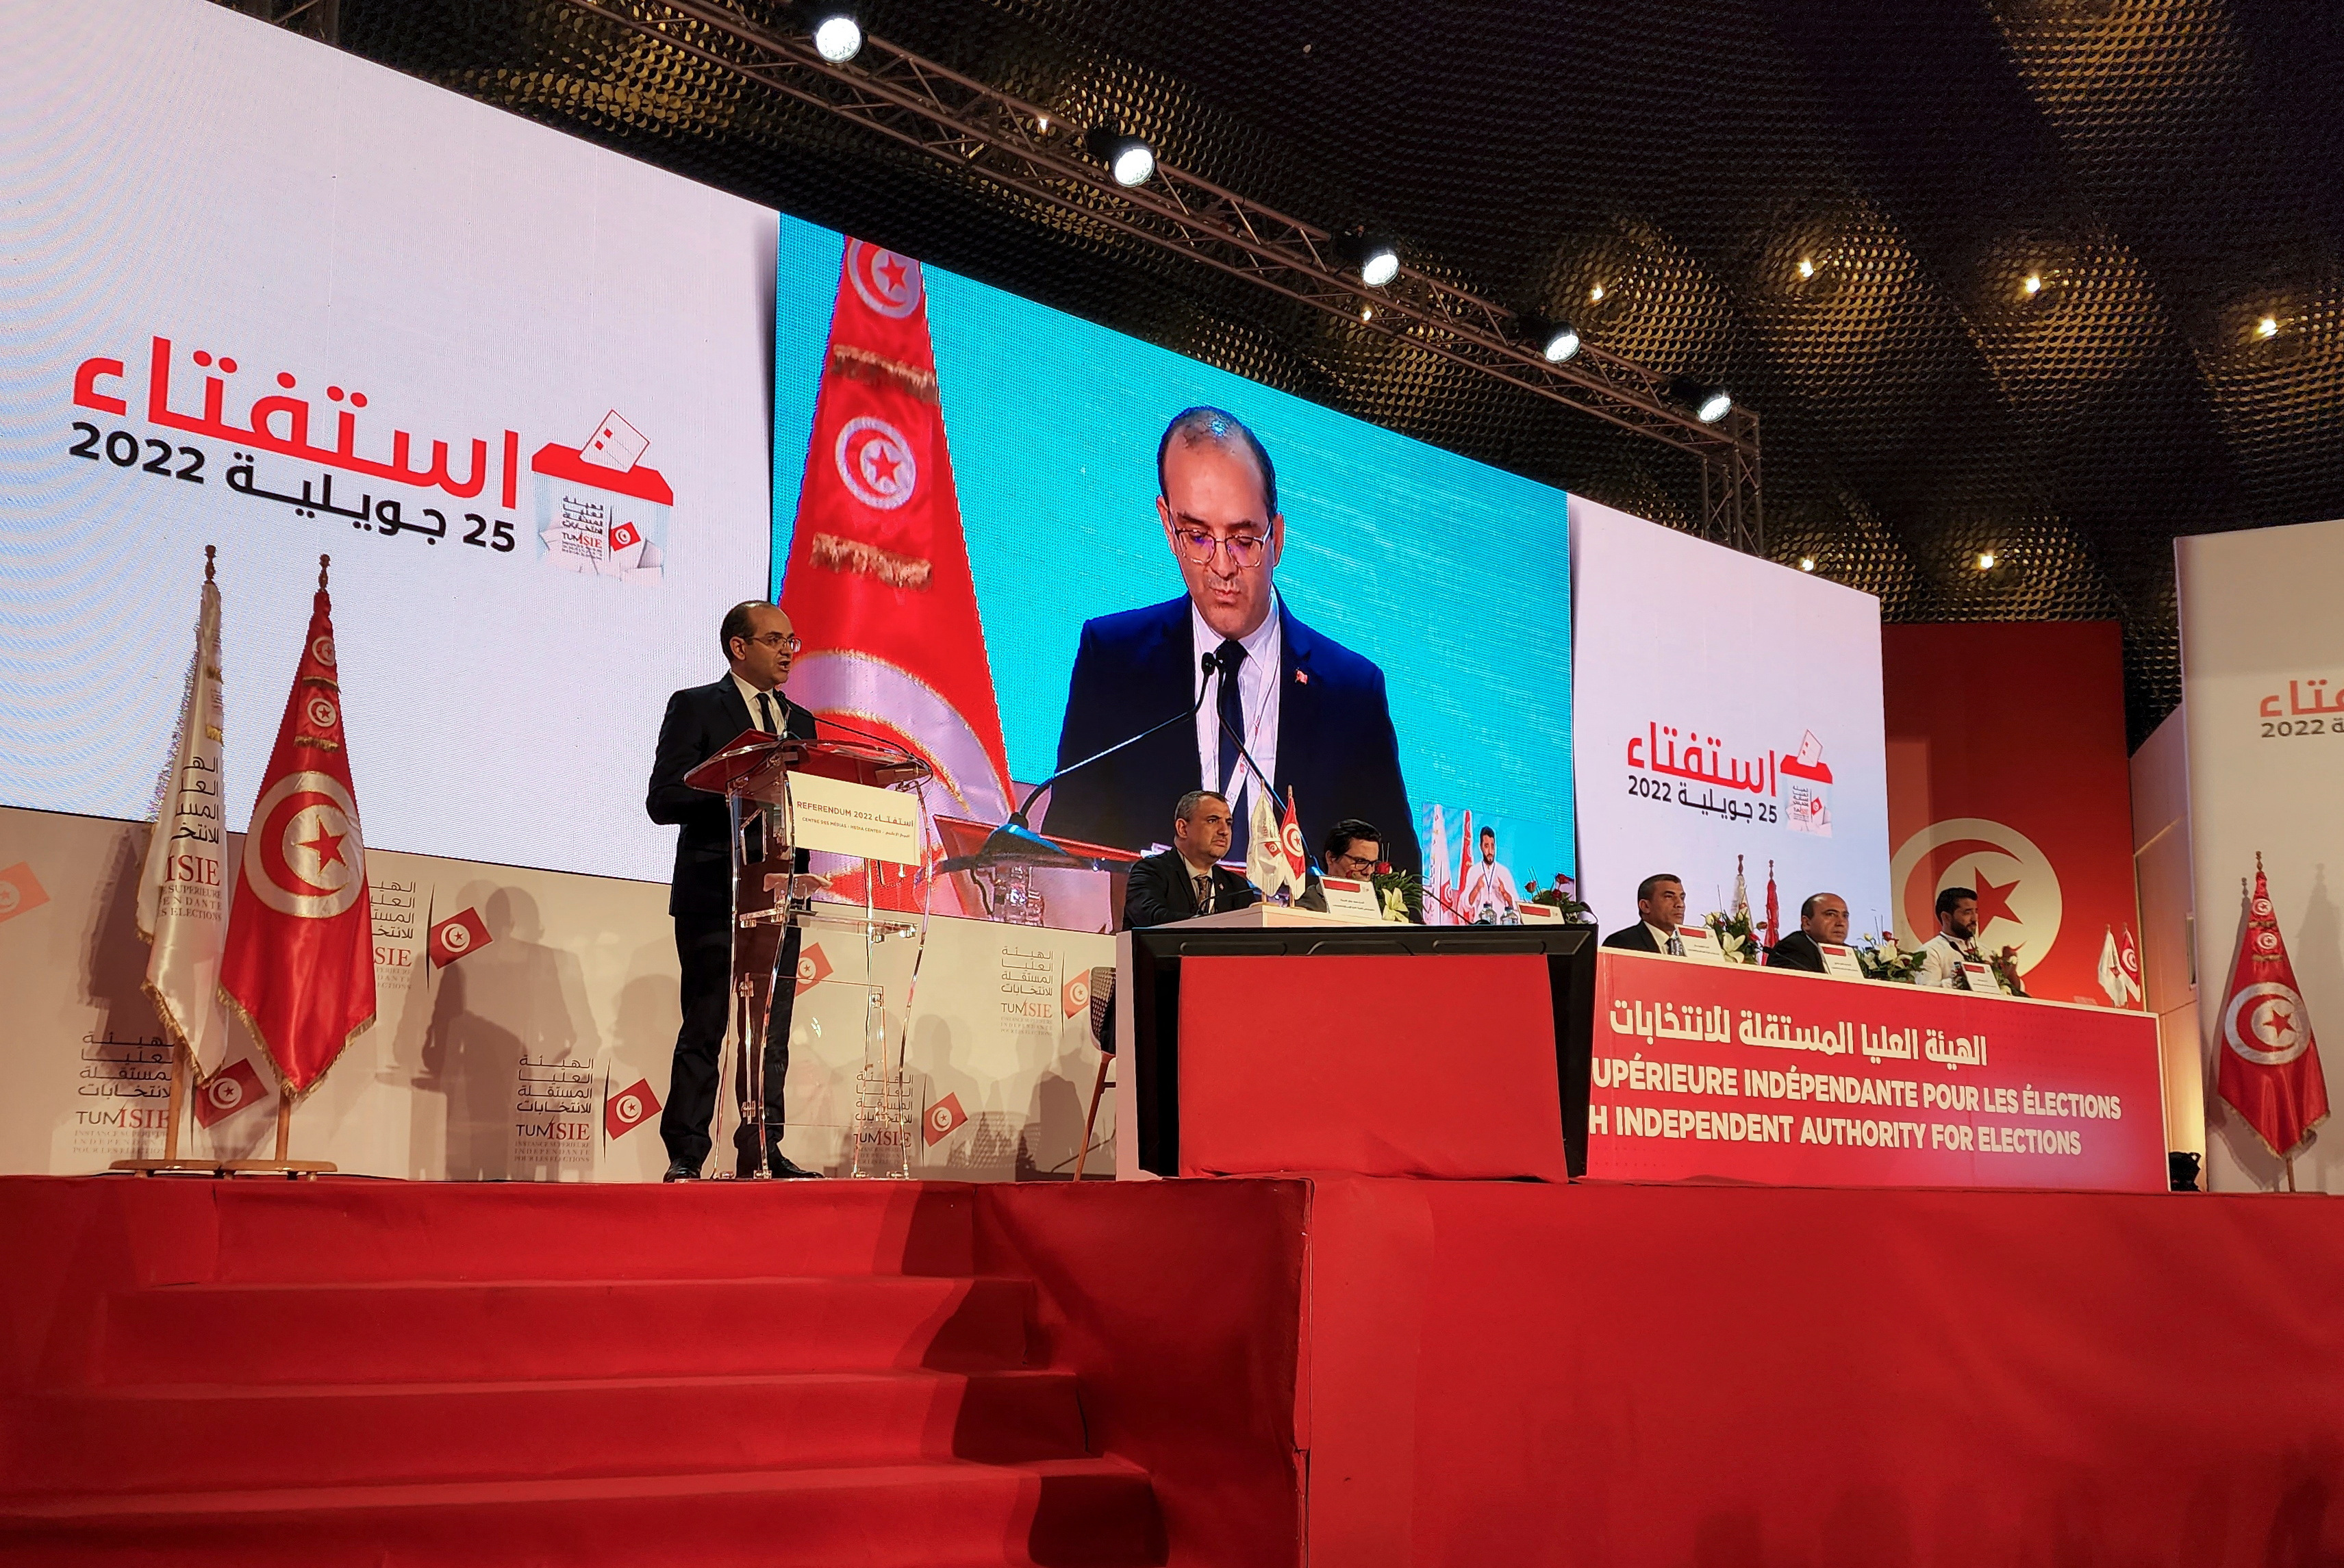 Farouk Bouasker, President of the Independent High Authority for Elections, speaks during the announcement of the preliminary results of a referendum on a new constitution in Tunis